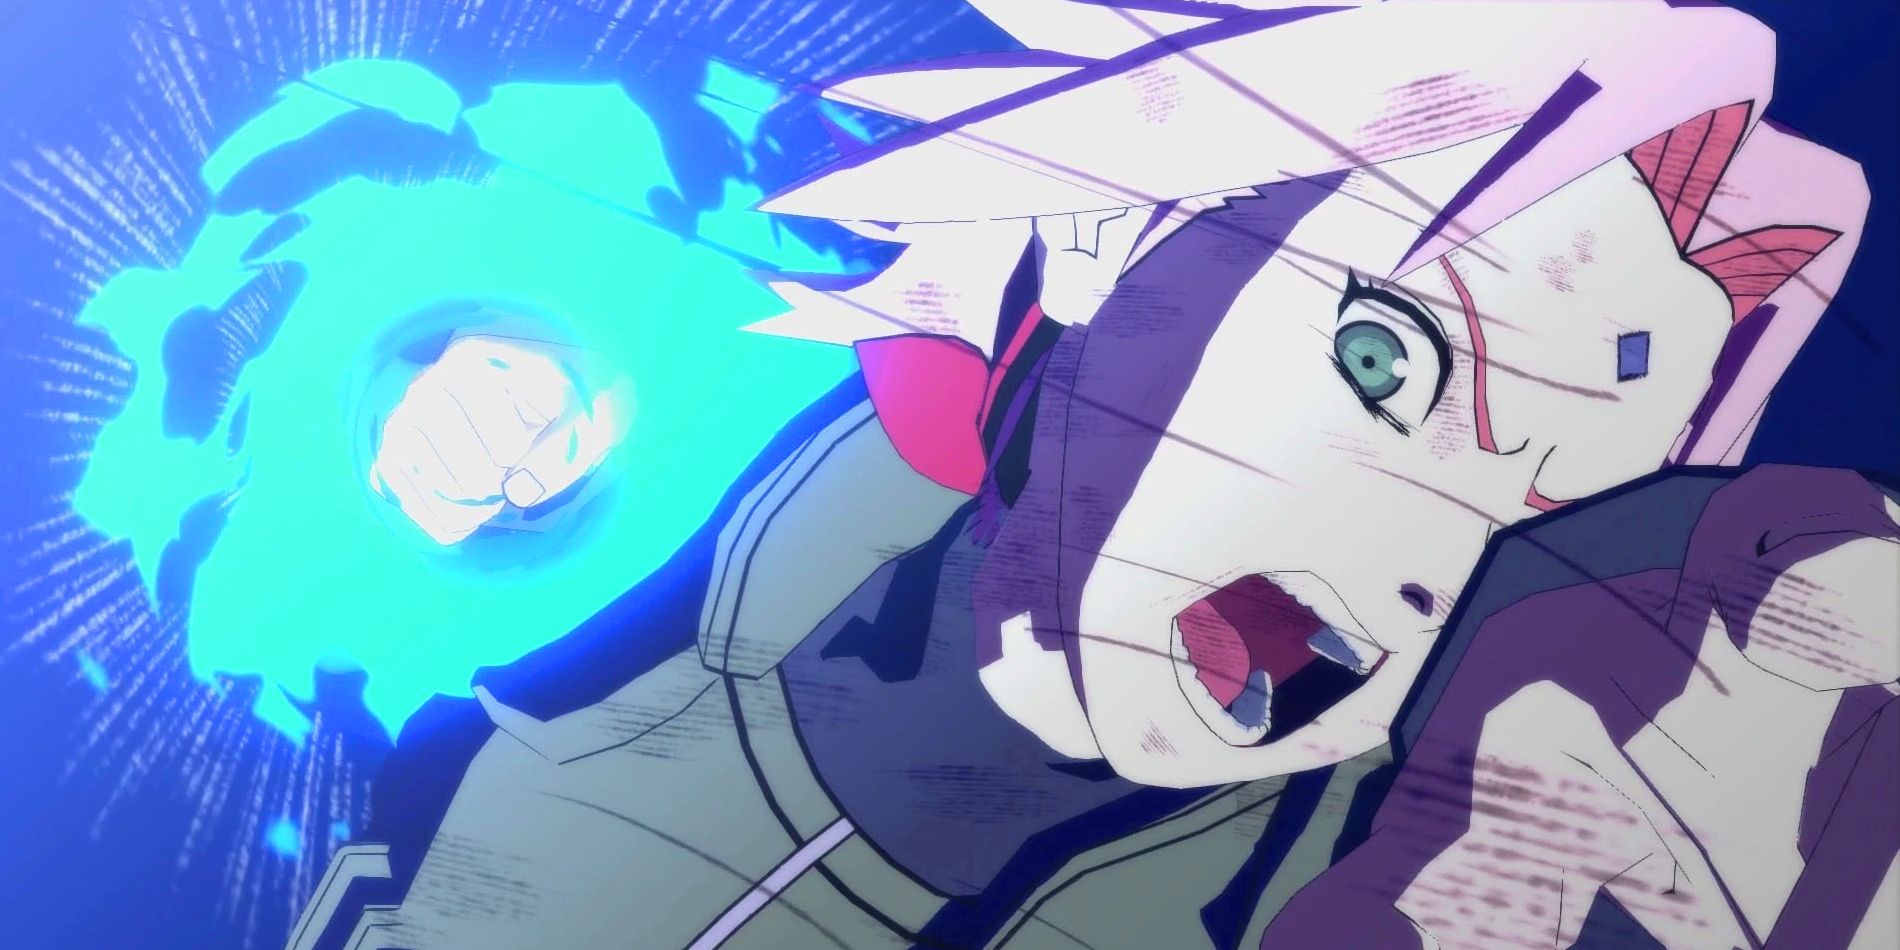 Naruto character Sakura is seen in a screen shot from the game Naruto Ninja Storm 4 as she is about to land a blue colored punch while yelling. She is wearing a Jonin vest and has a purple square on her forehead.